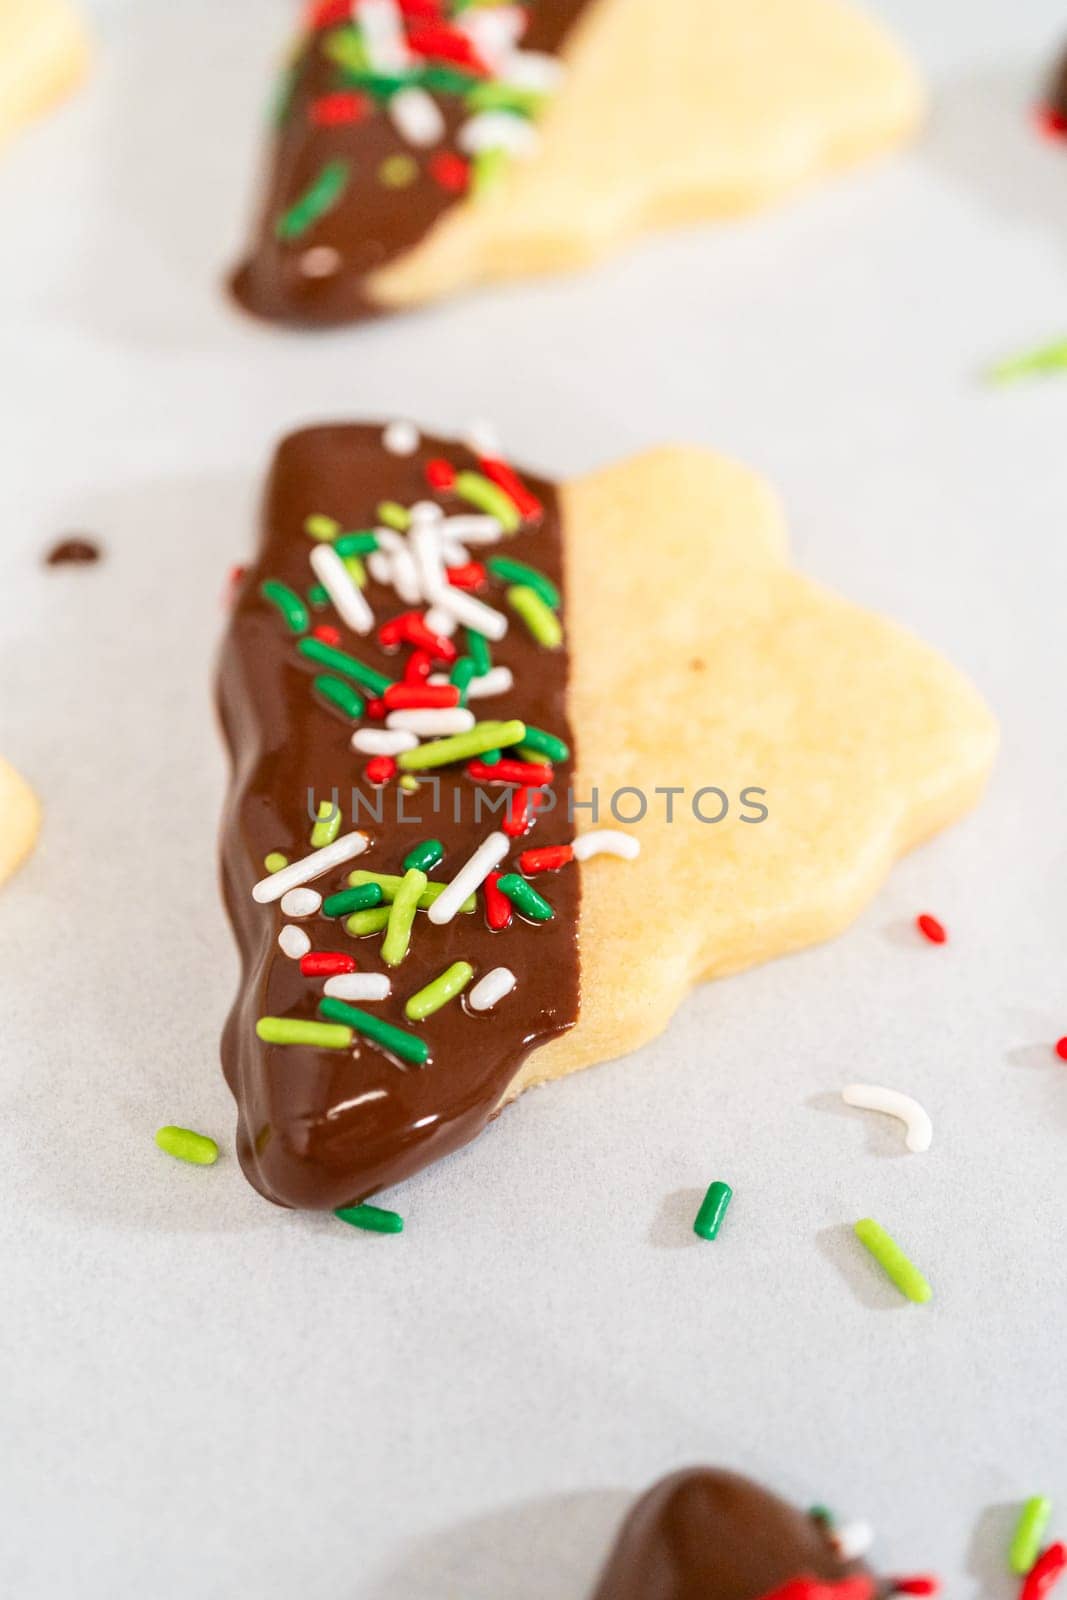 Buttery cookies half-dipped in chocolate, sprinkled with festive red, green, and white decorations, laid on white parchment to set.